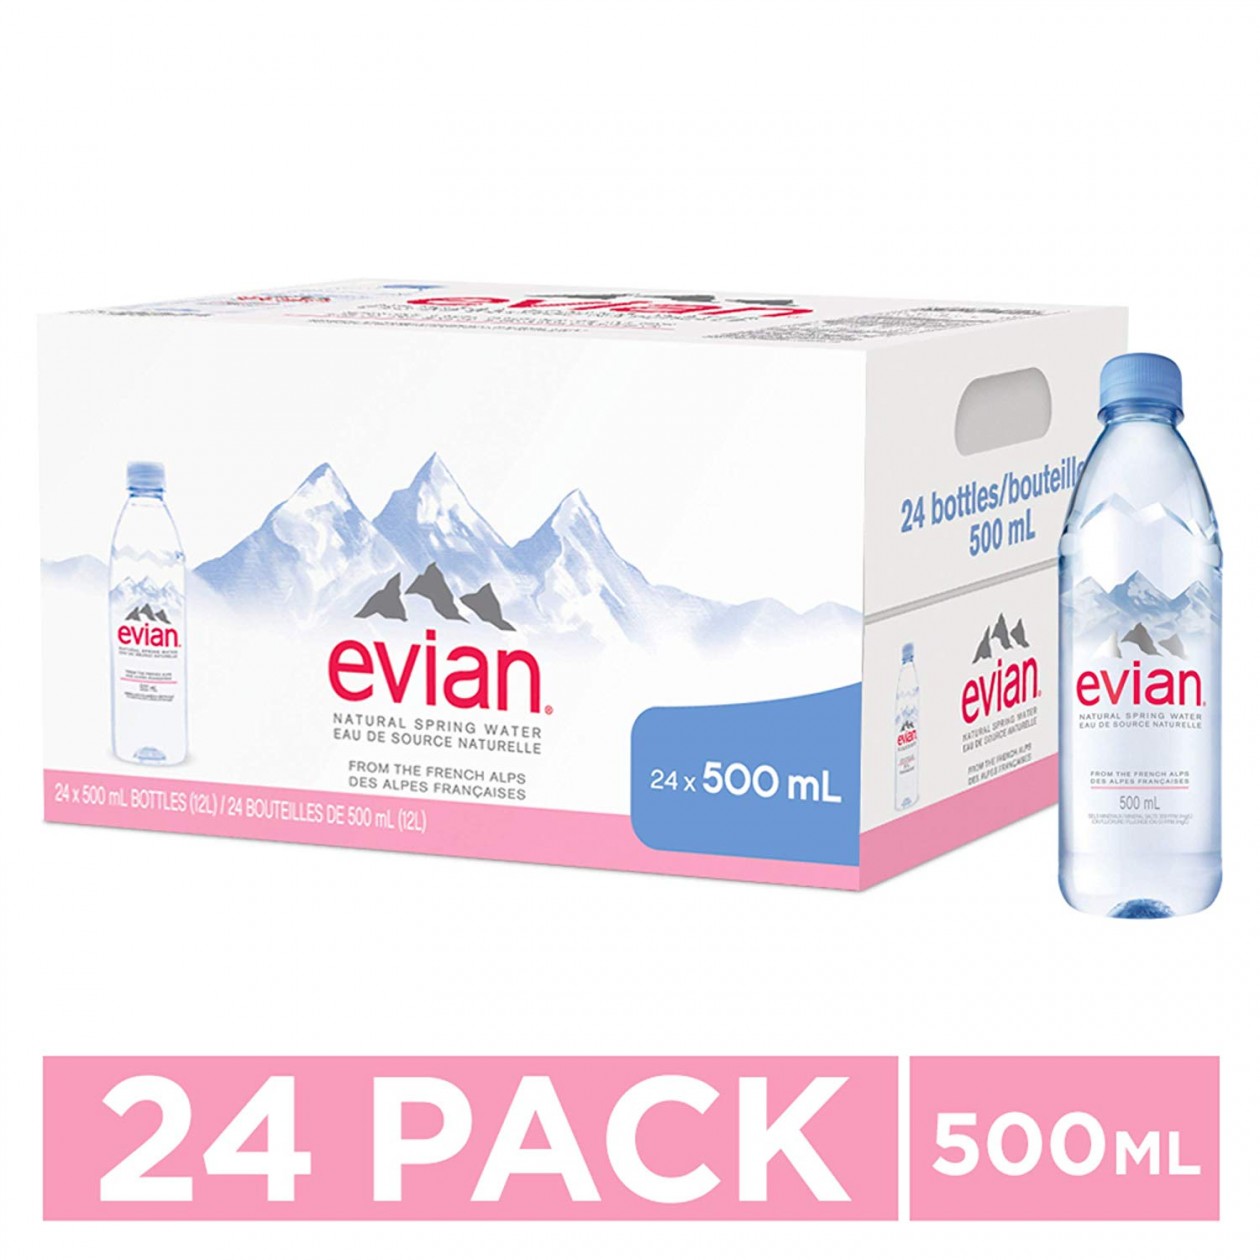 Evian Mineral Water 500ml